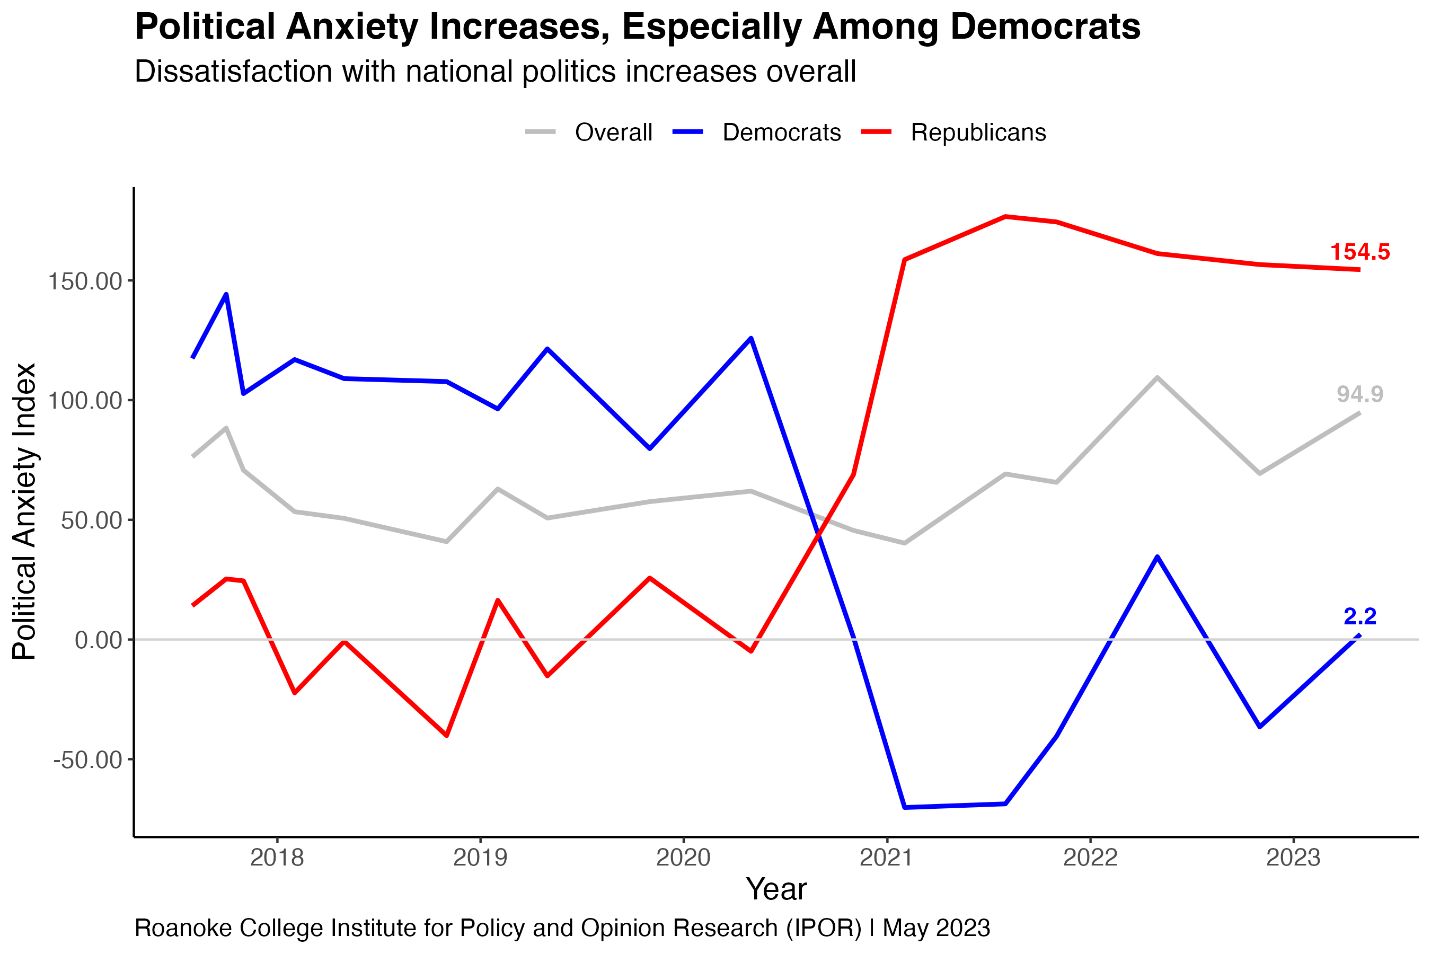 Political Anxiety Increases, especially among Democracts